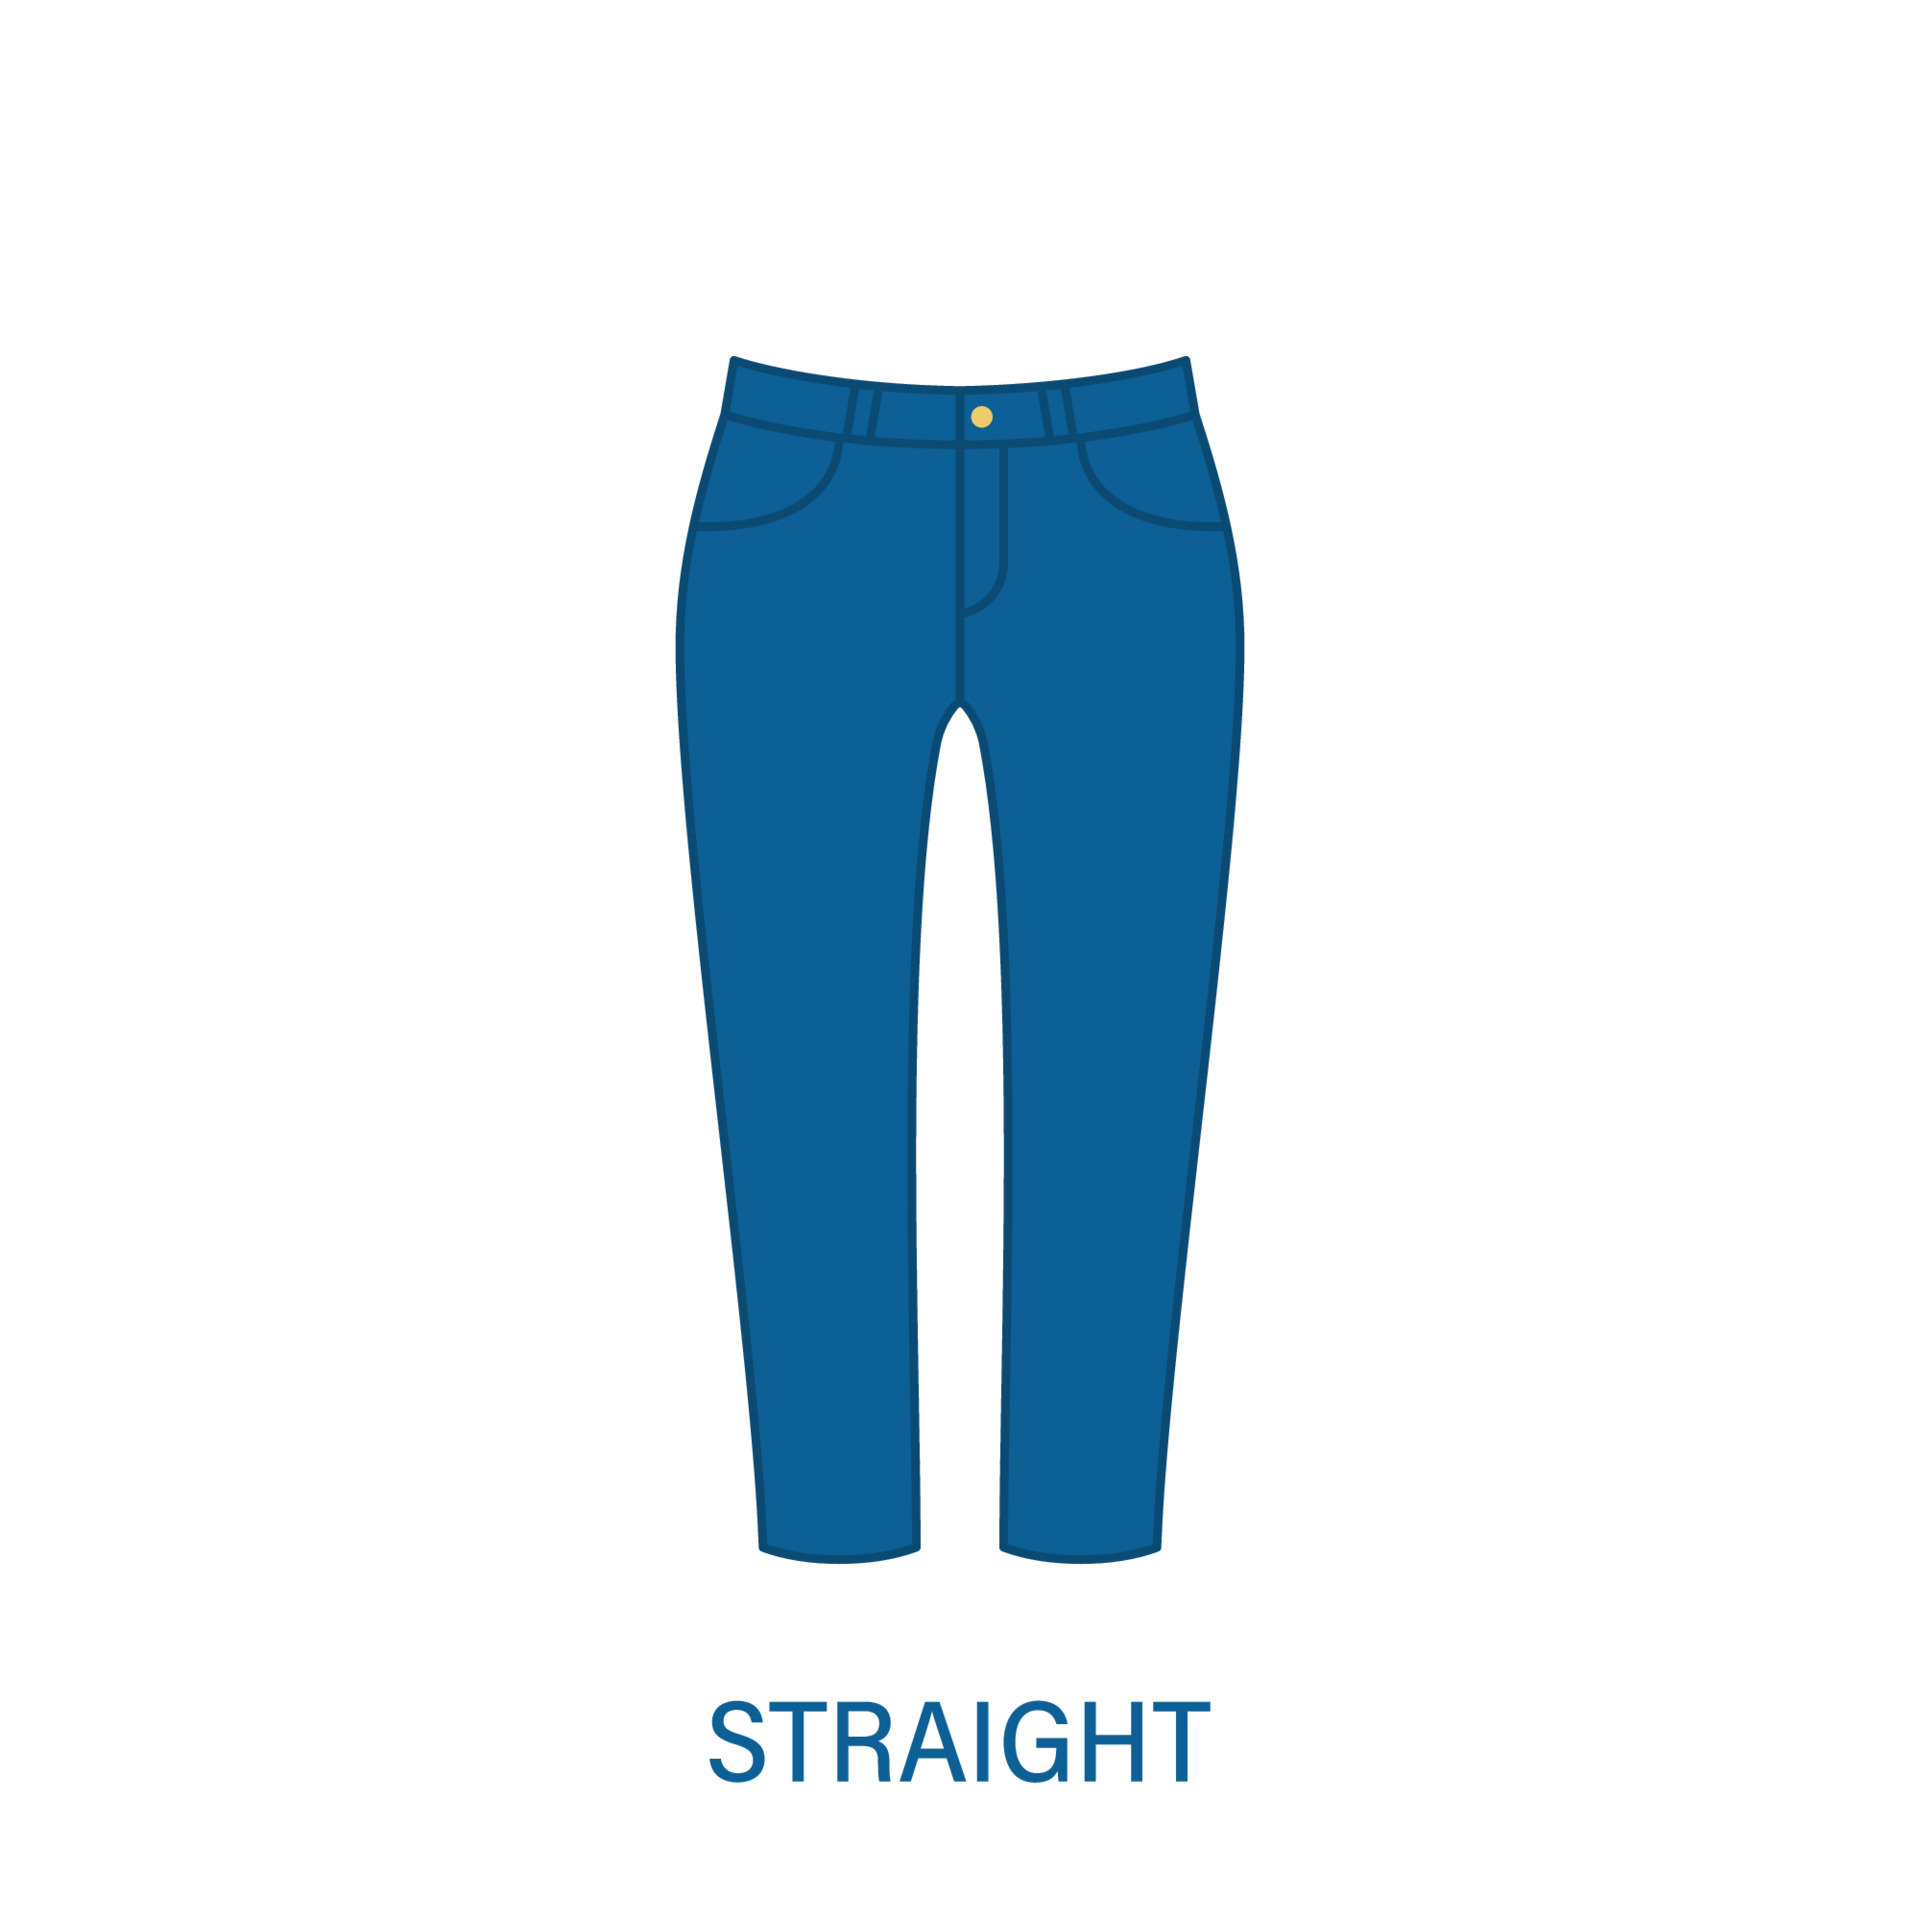 Straight Pants Type of Woman Trousers Silhouette Icon. Modern